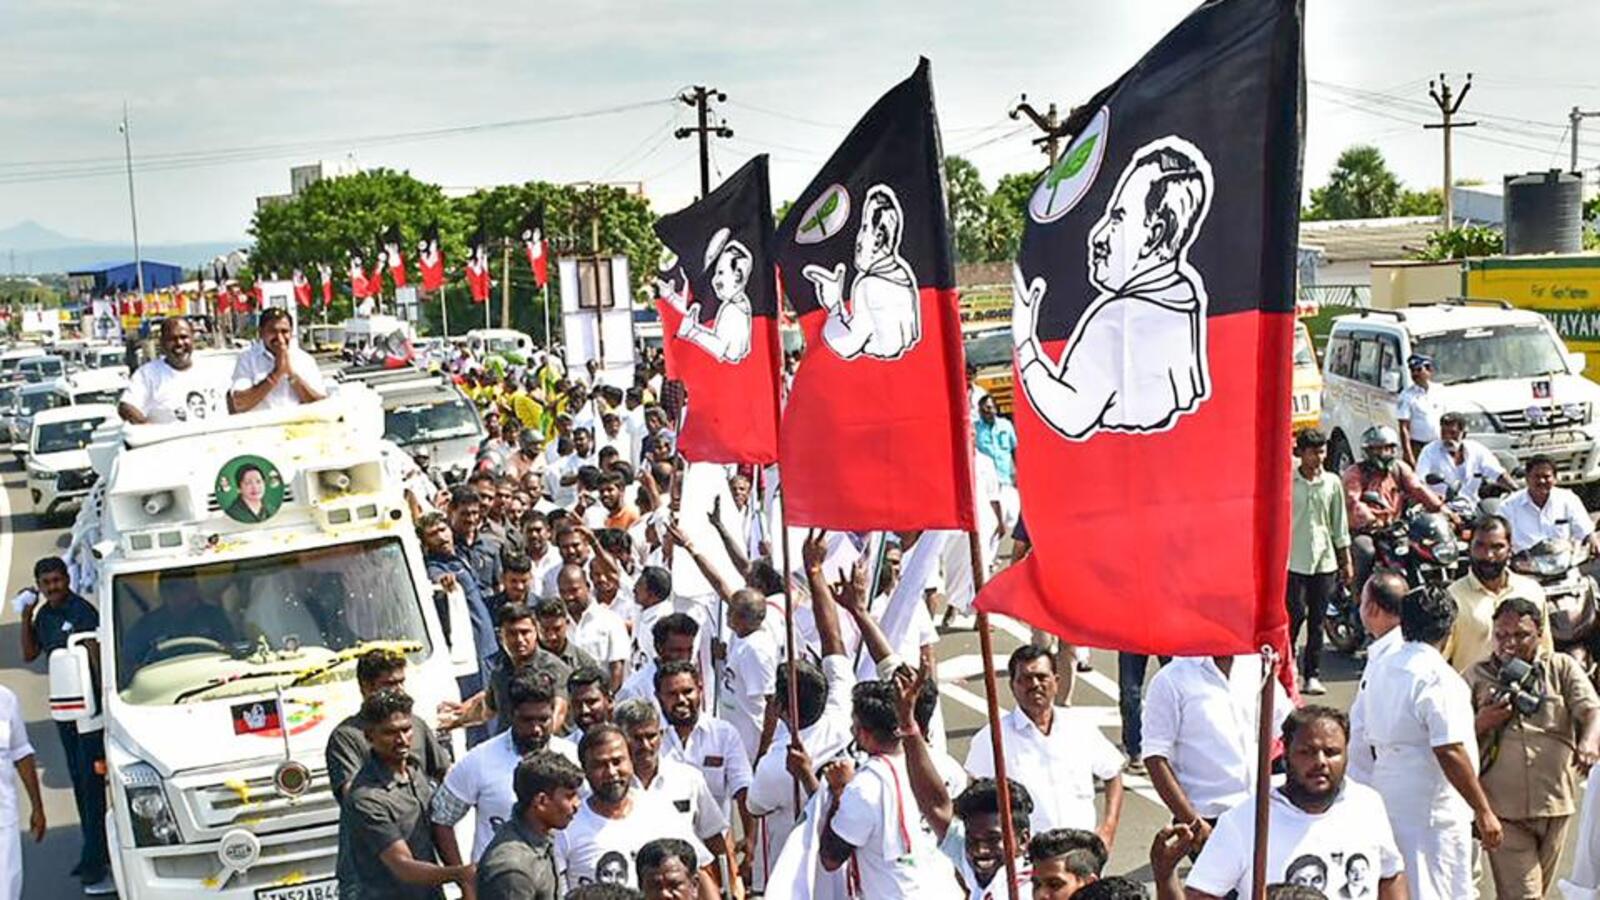 aiadmk-internal-feud-reaches-tn-assembly-factions-seek-speaker-s-recognition